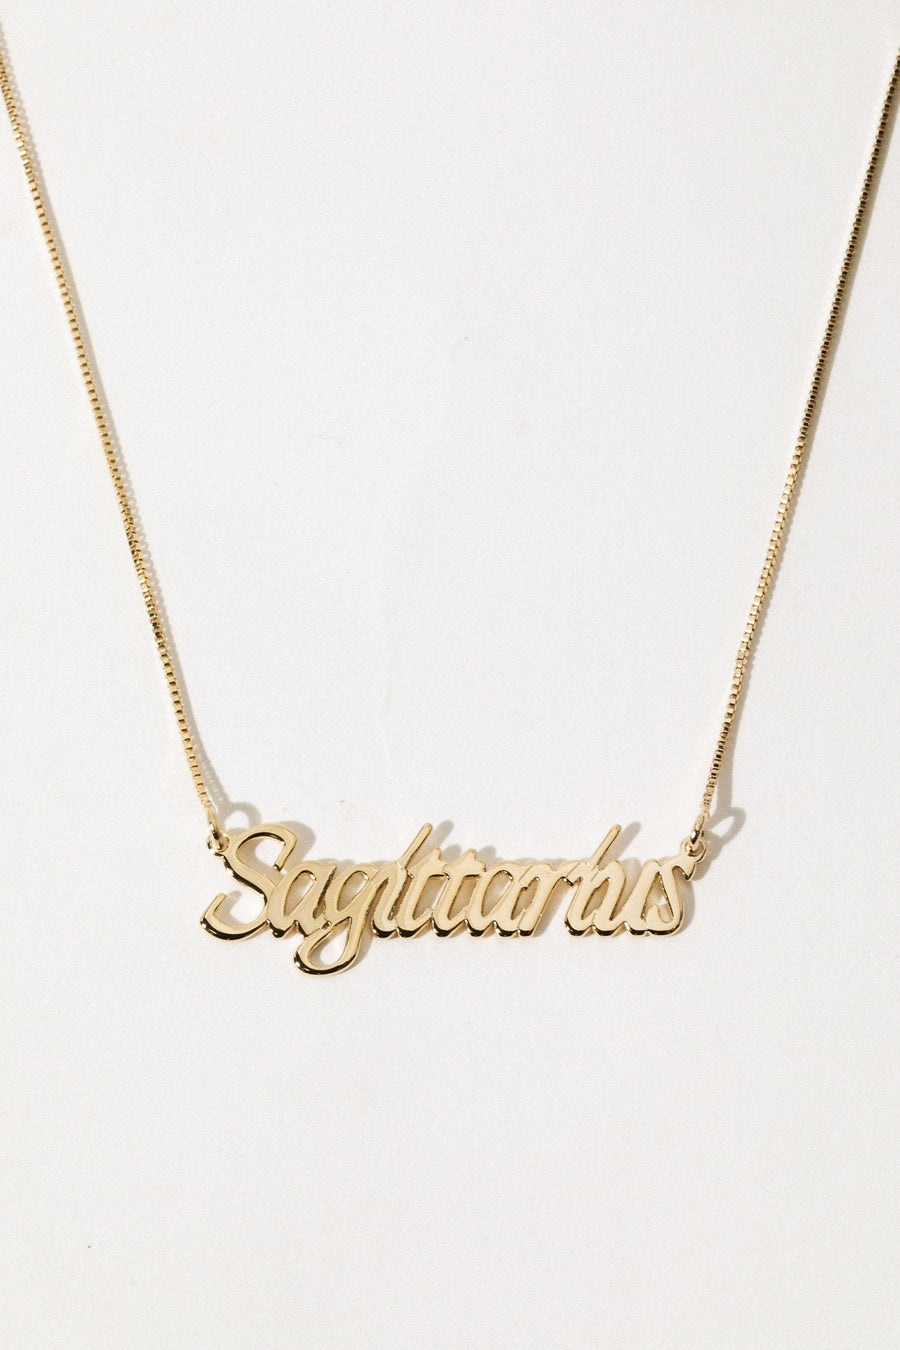 The Goth Booth Jewelry Sagittarius / Gold / 16 inches Signature Zodiac Necklace